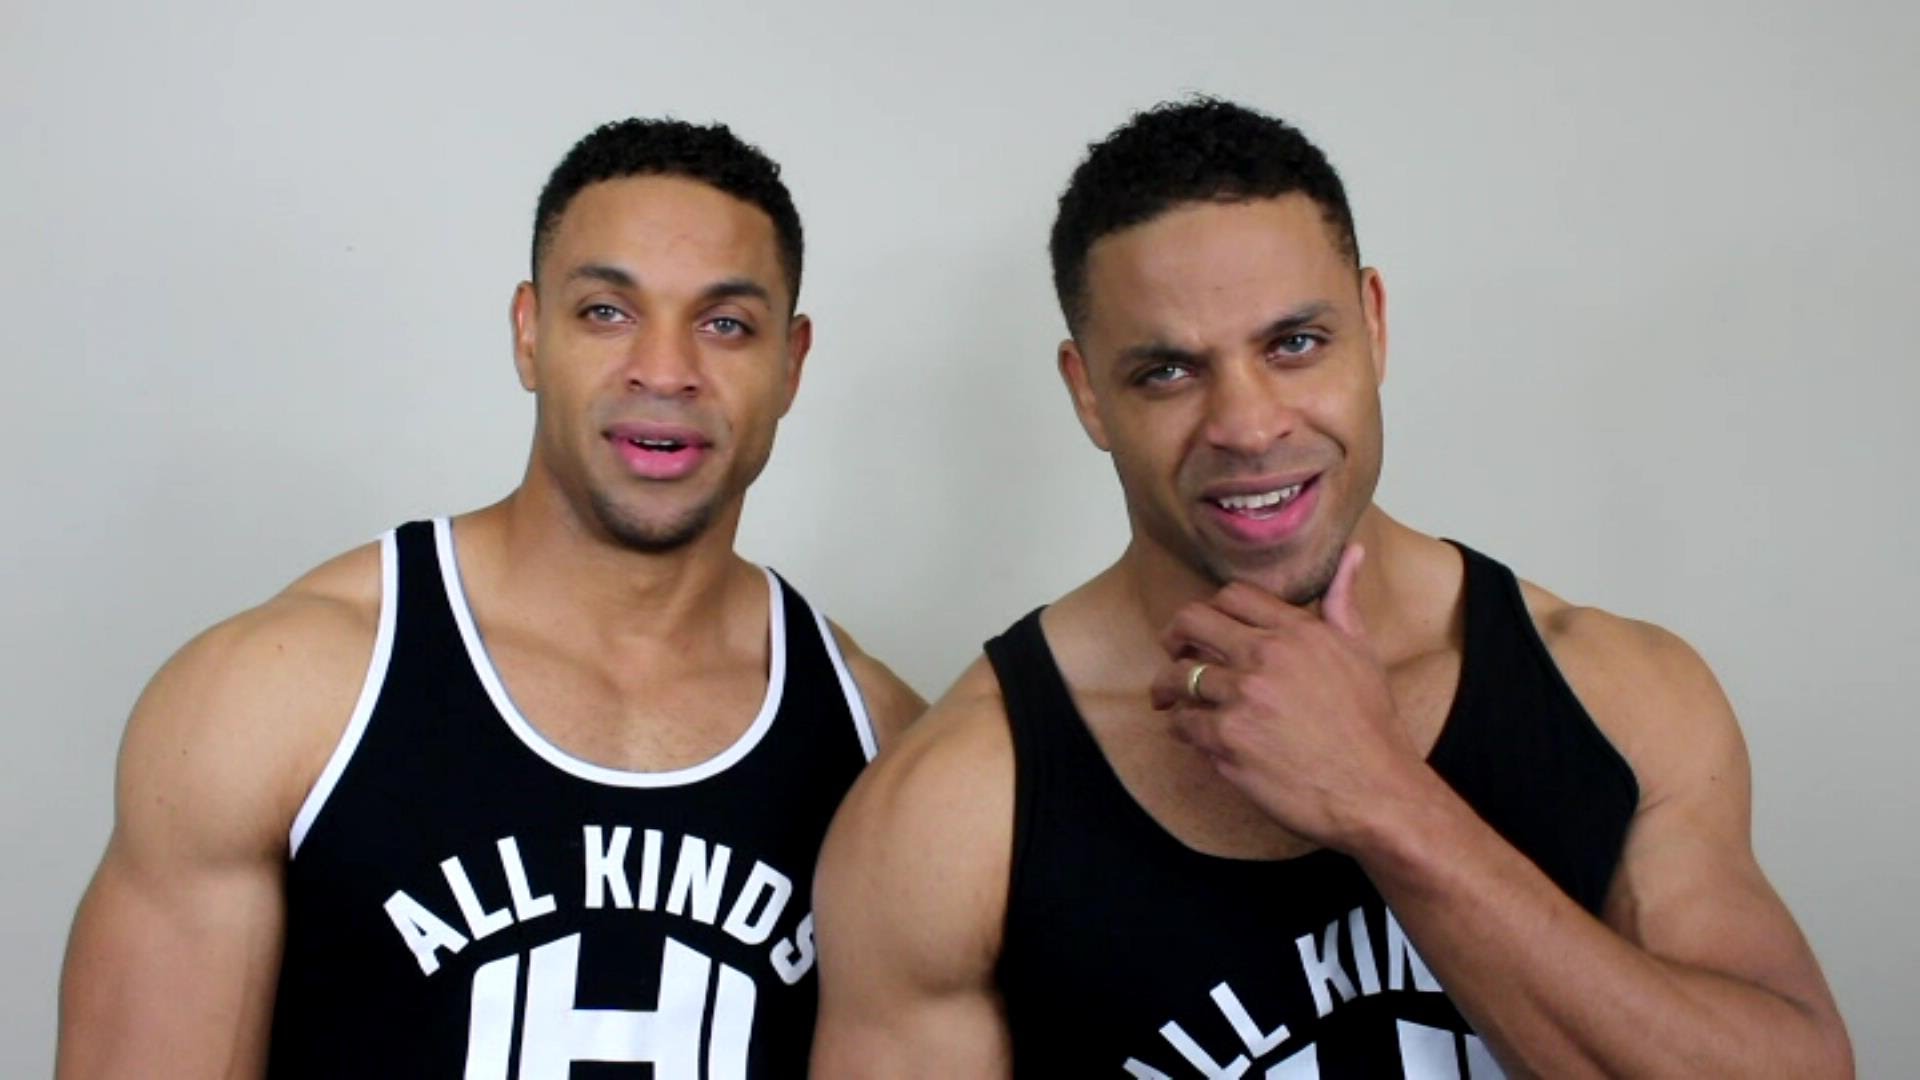 The various reasons listed above are why the Hodgetwins have become so succ...